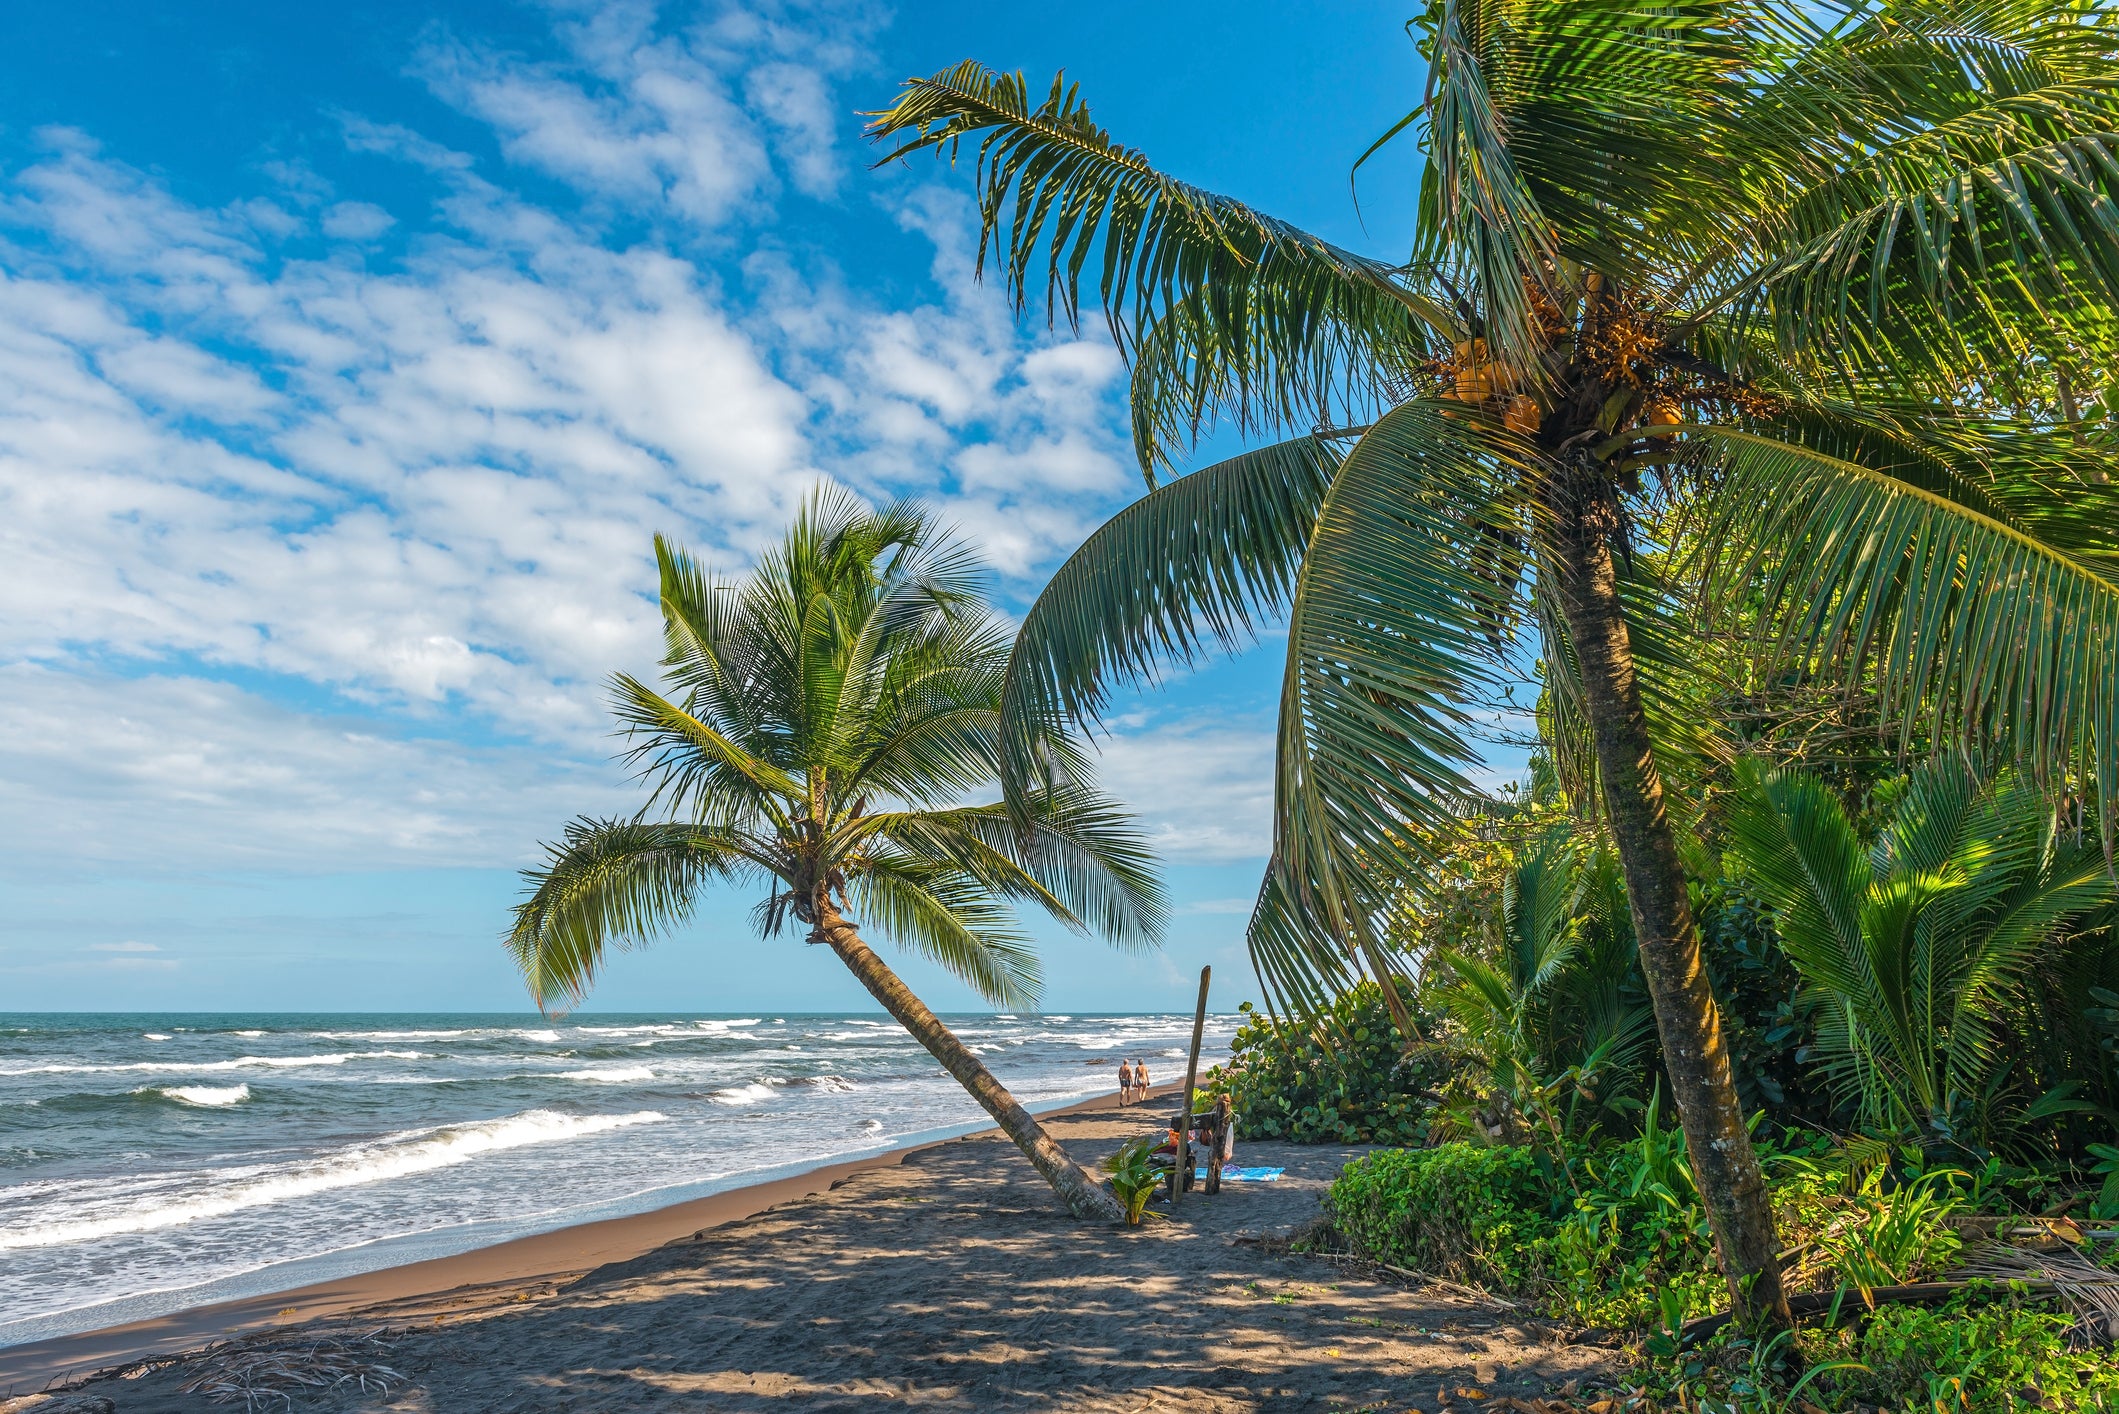 People walking along the tropical rainforest beach in Tortuguero with beautiful palm trees and turquoise water, Costa Rica, Central America